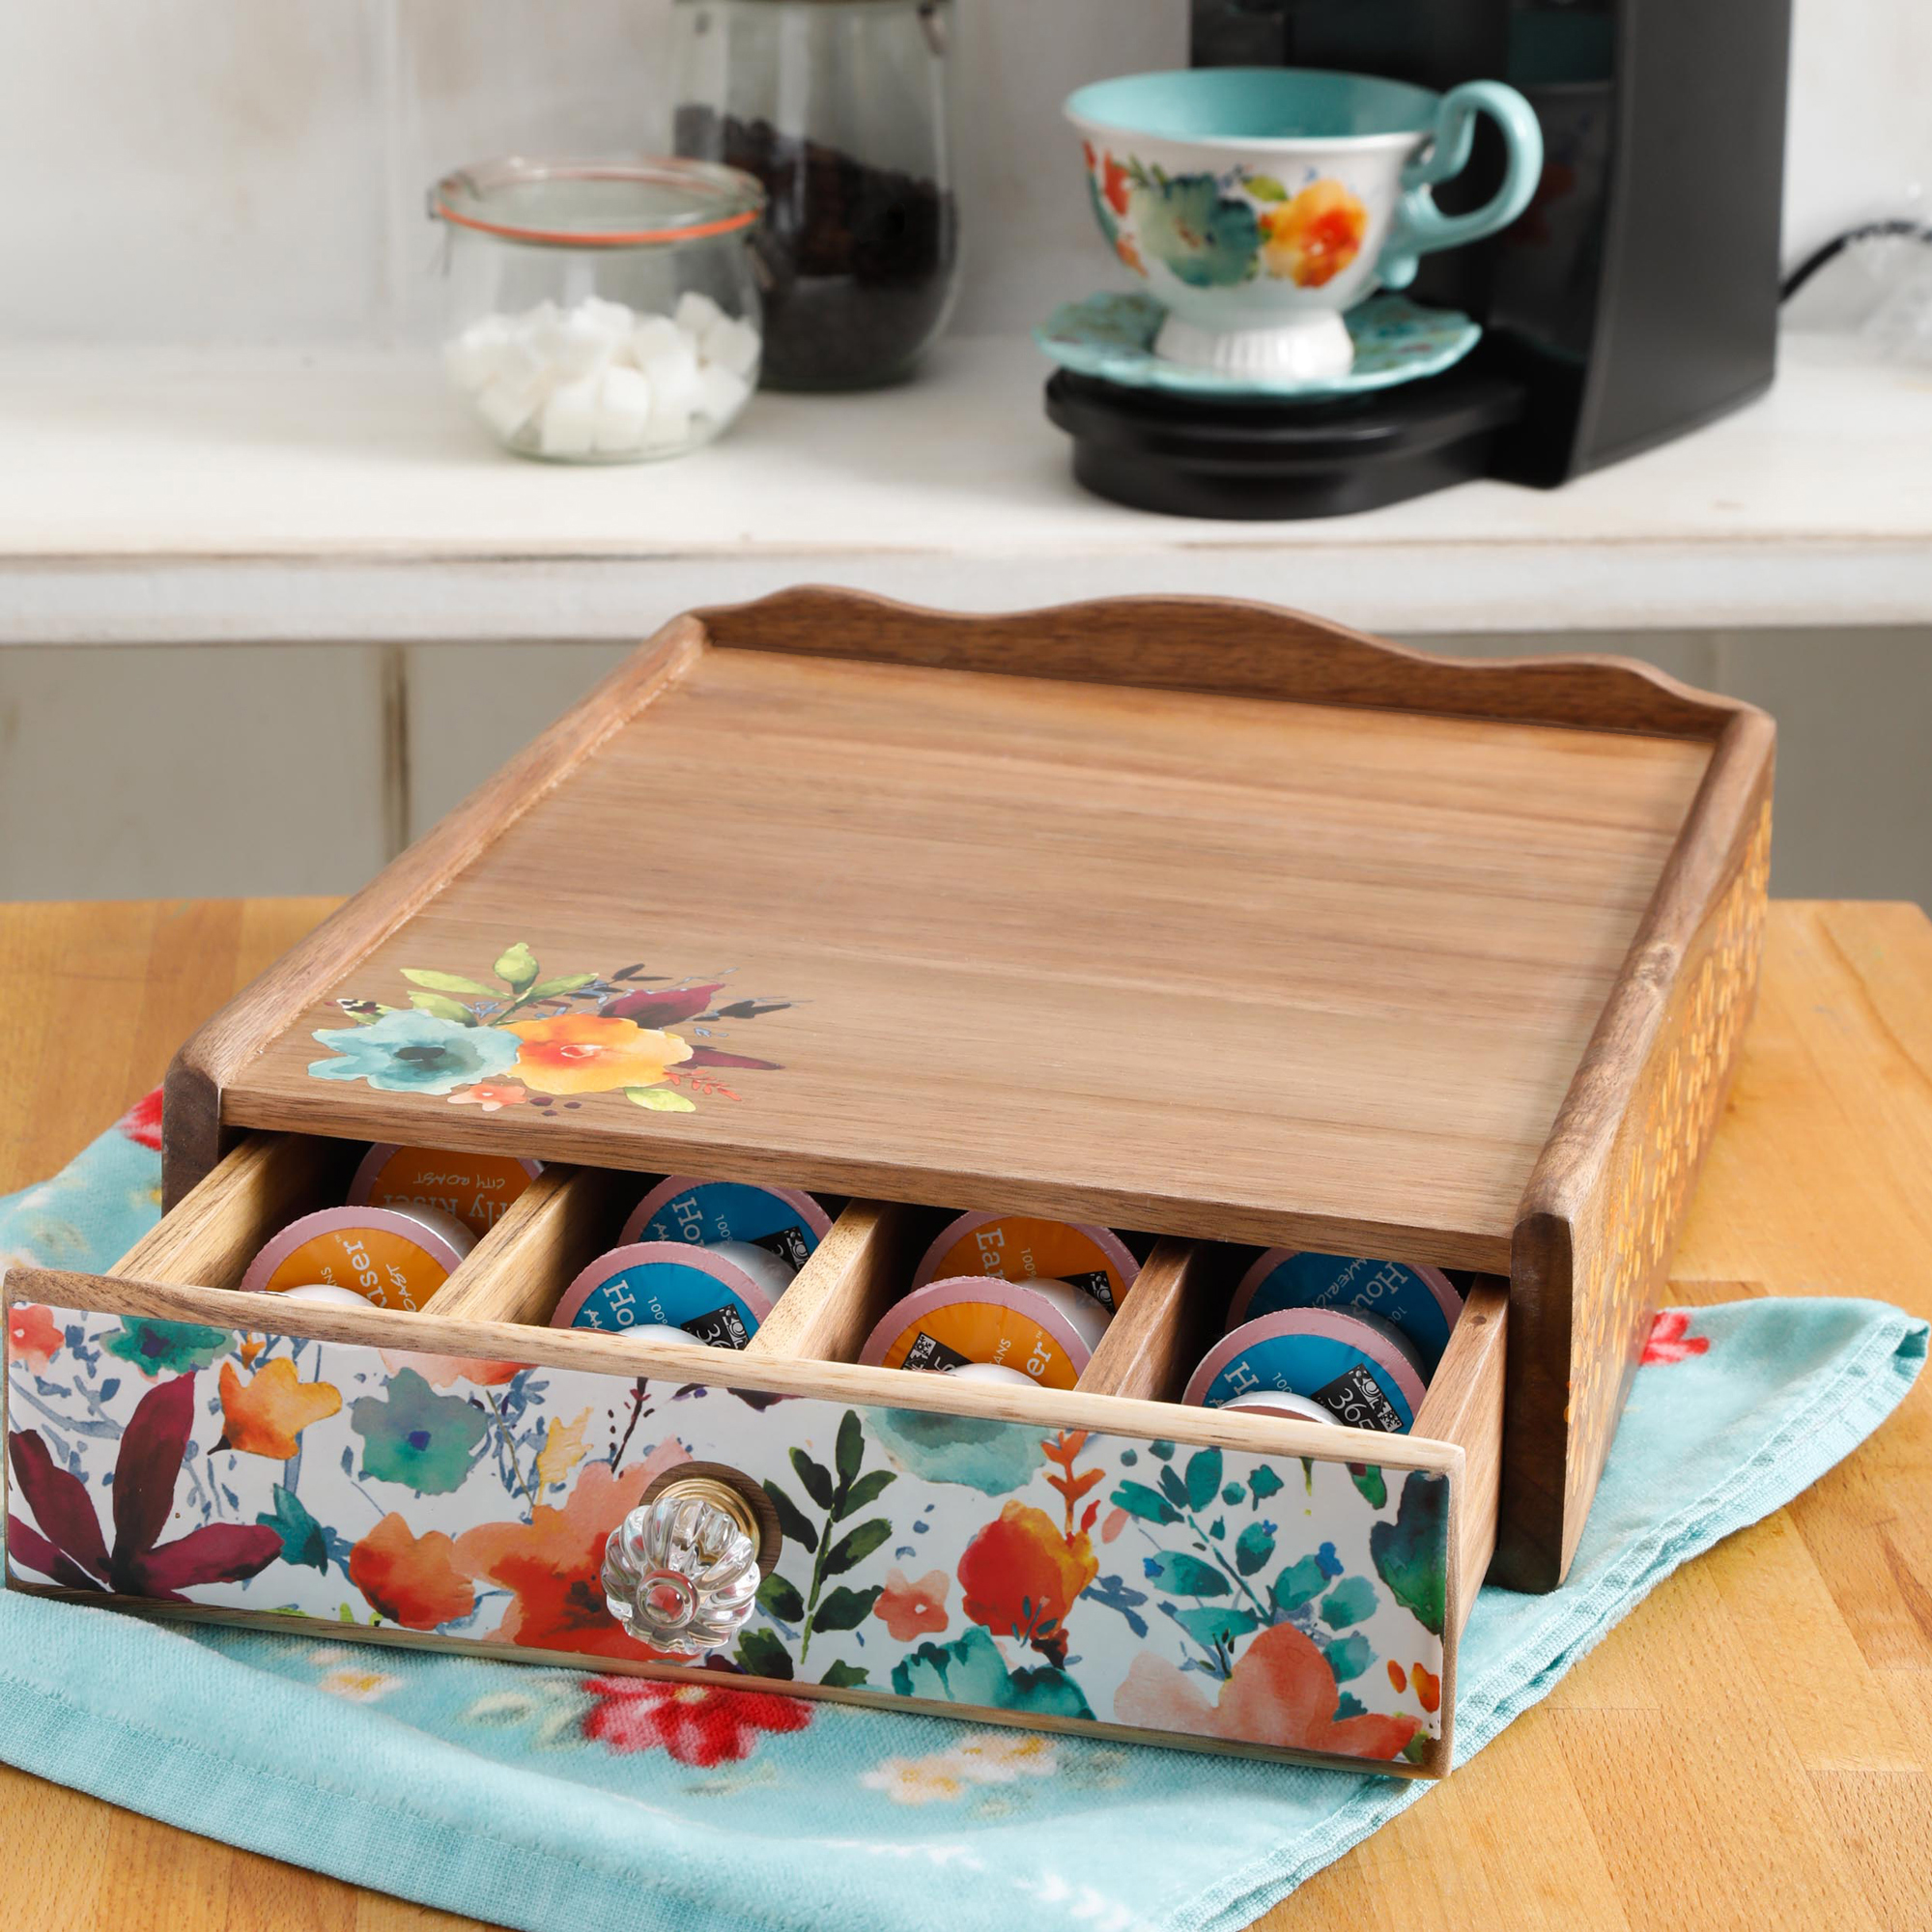 Coffee pods inside a painted wooden crate